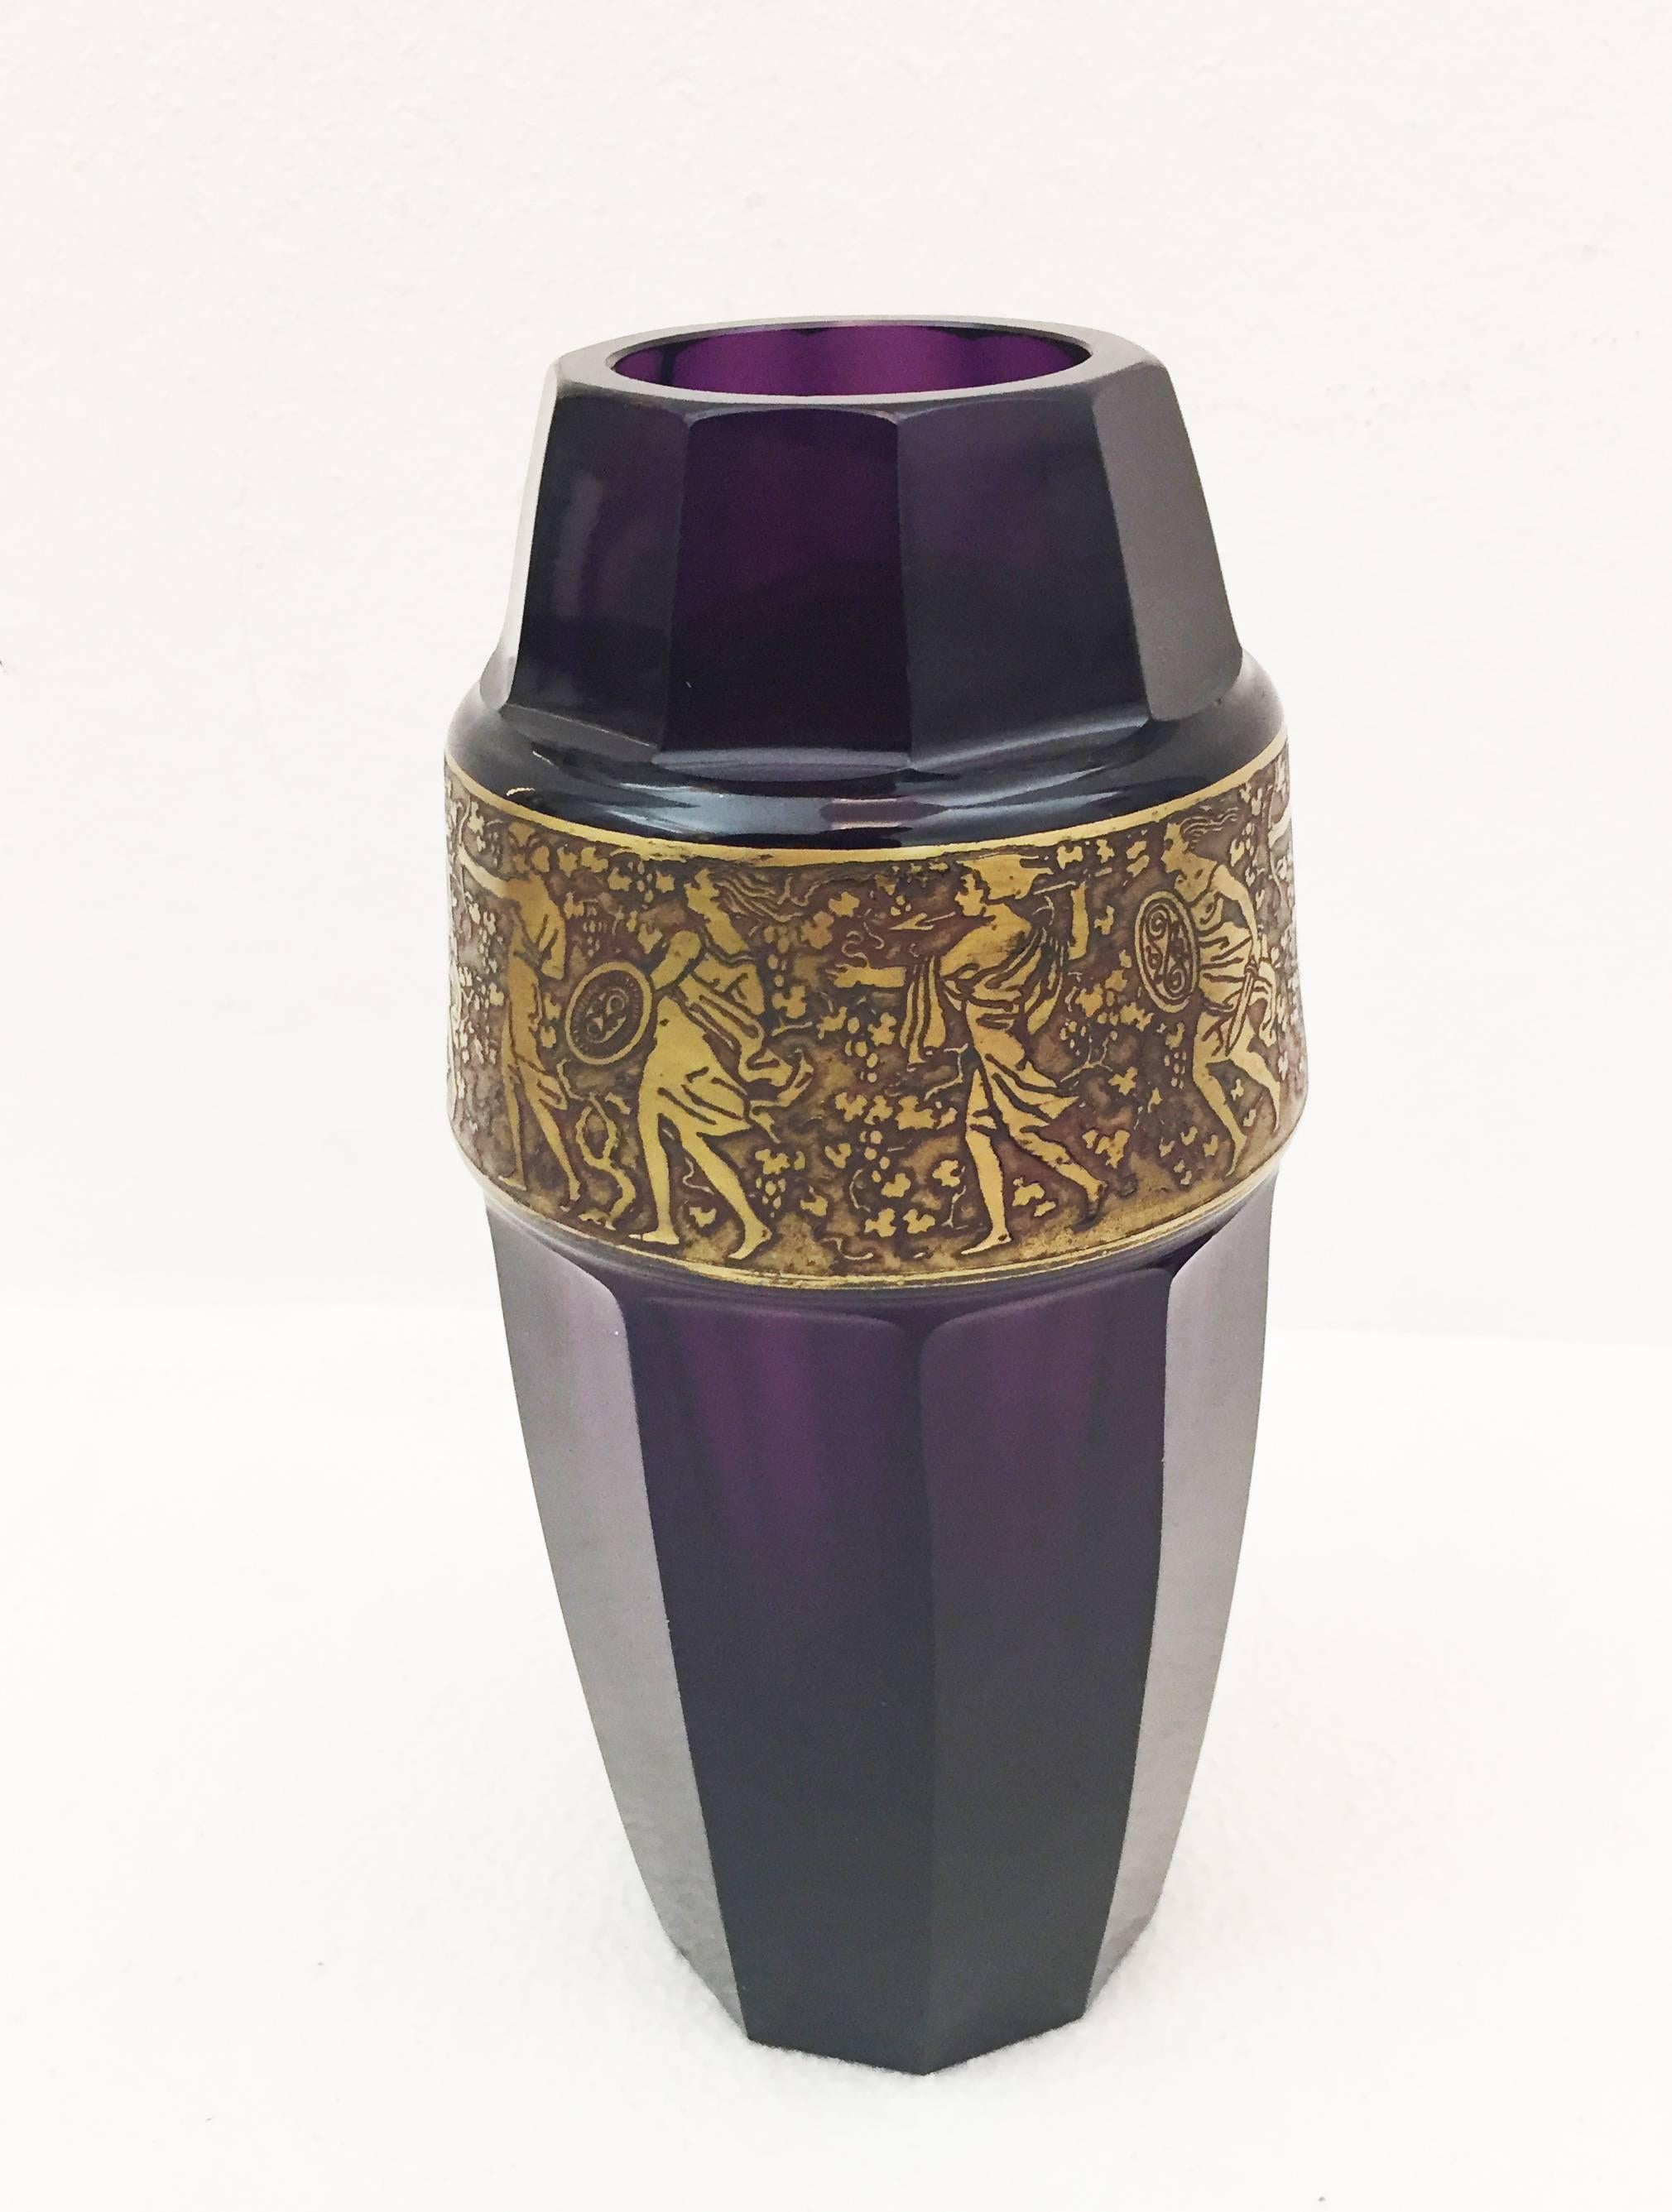 Hand blow purple glass with a gold trim, made circa 1900 in Karlsbad by Moser Glassworks.